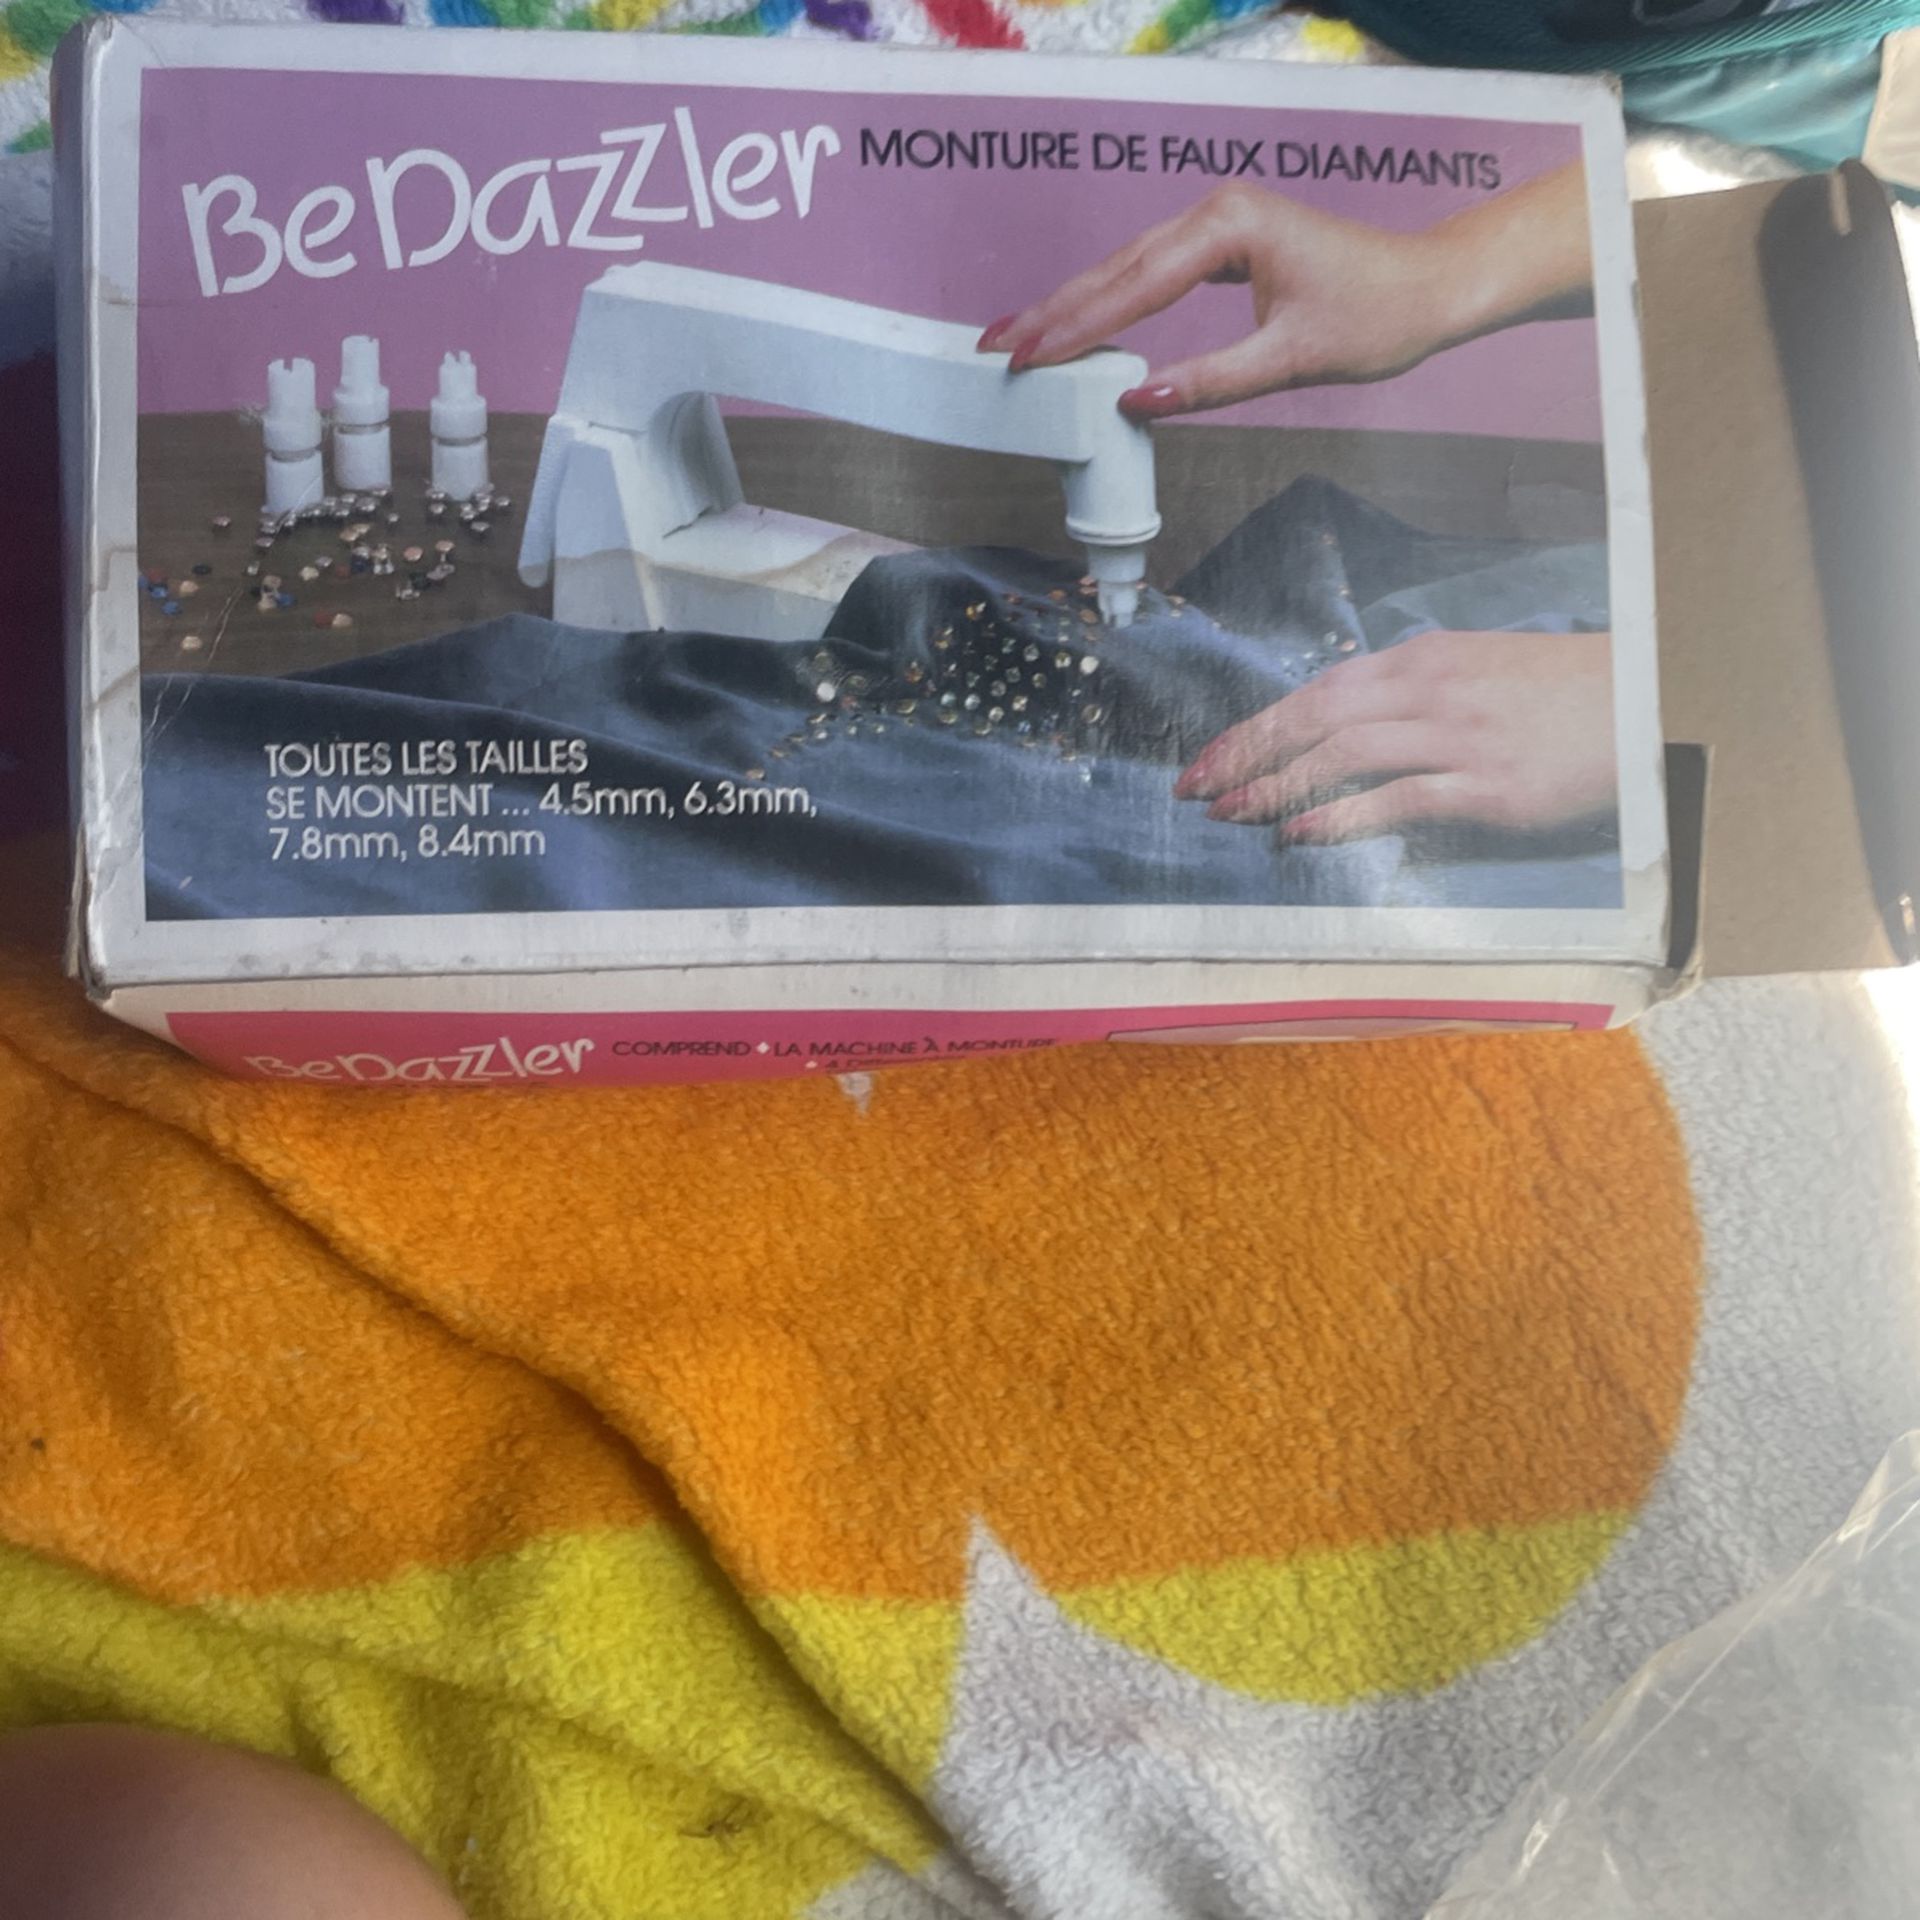 Bedazzled